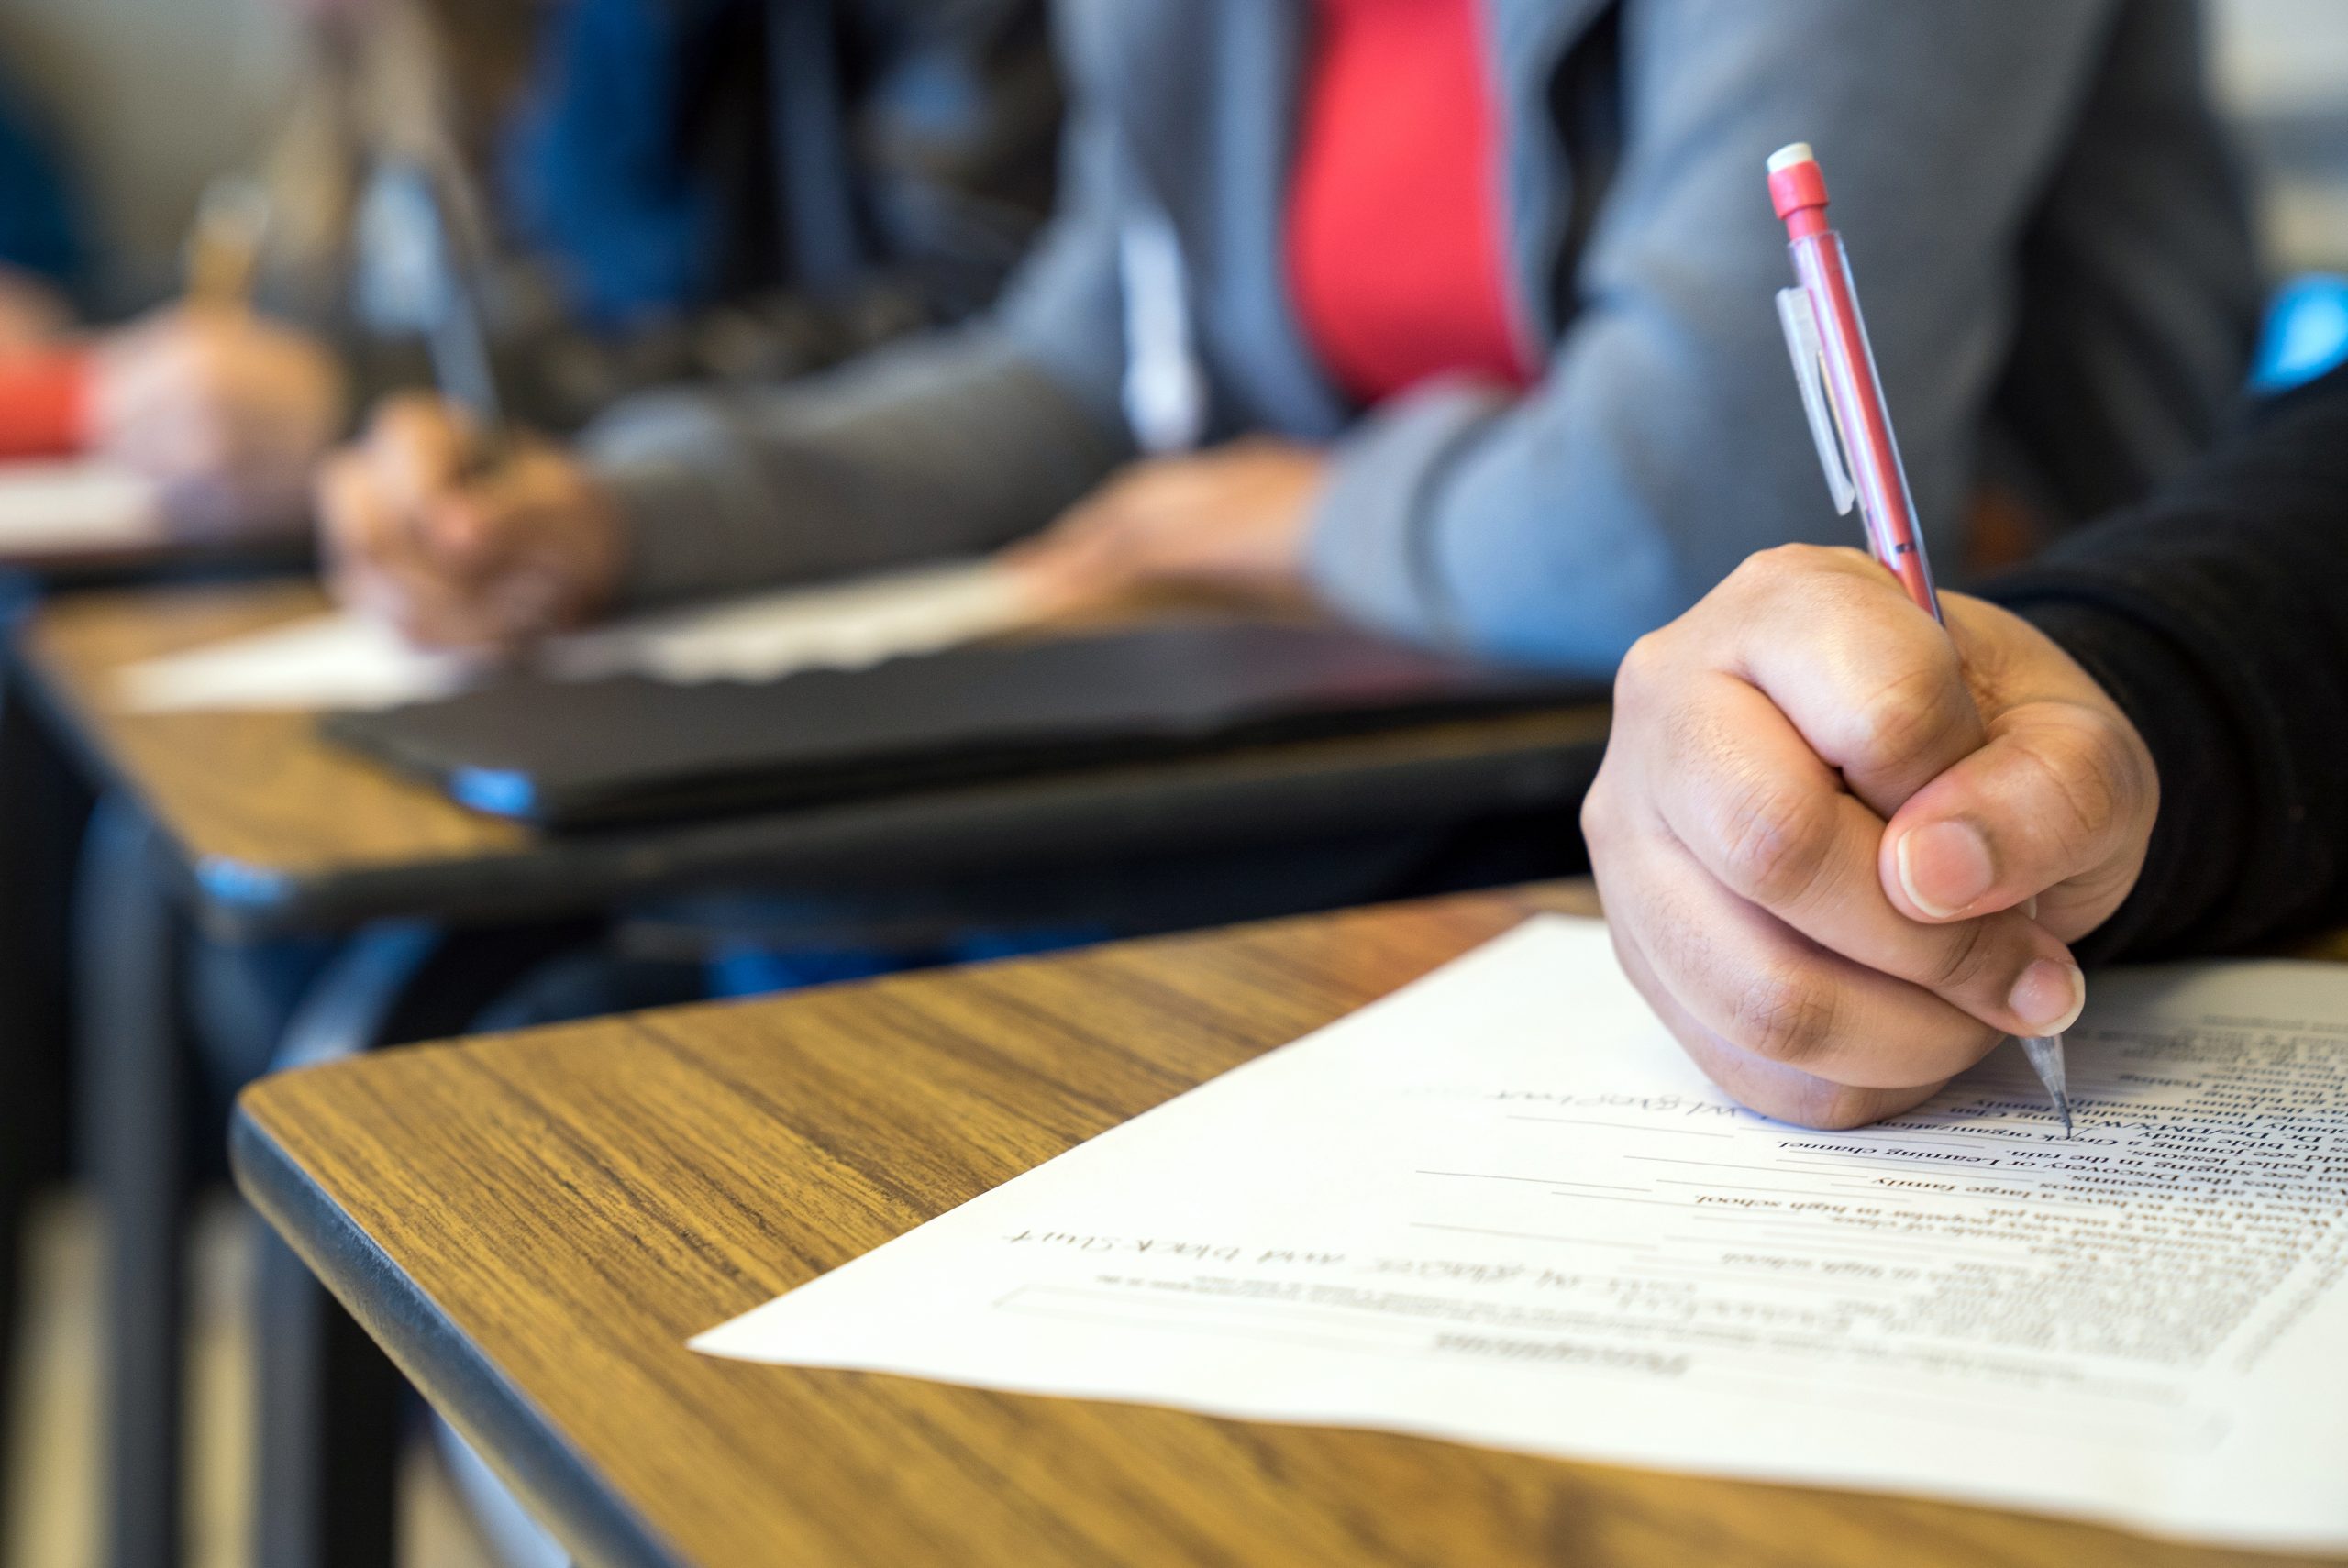 A students hand writing with a mechanical pencil on a handout given out during class.